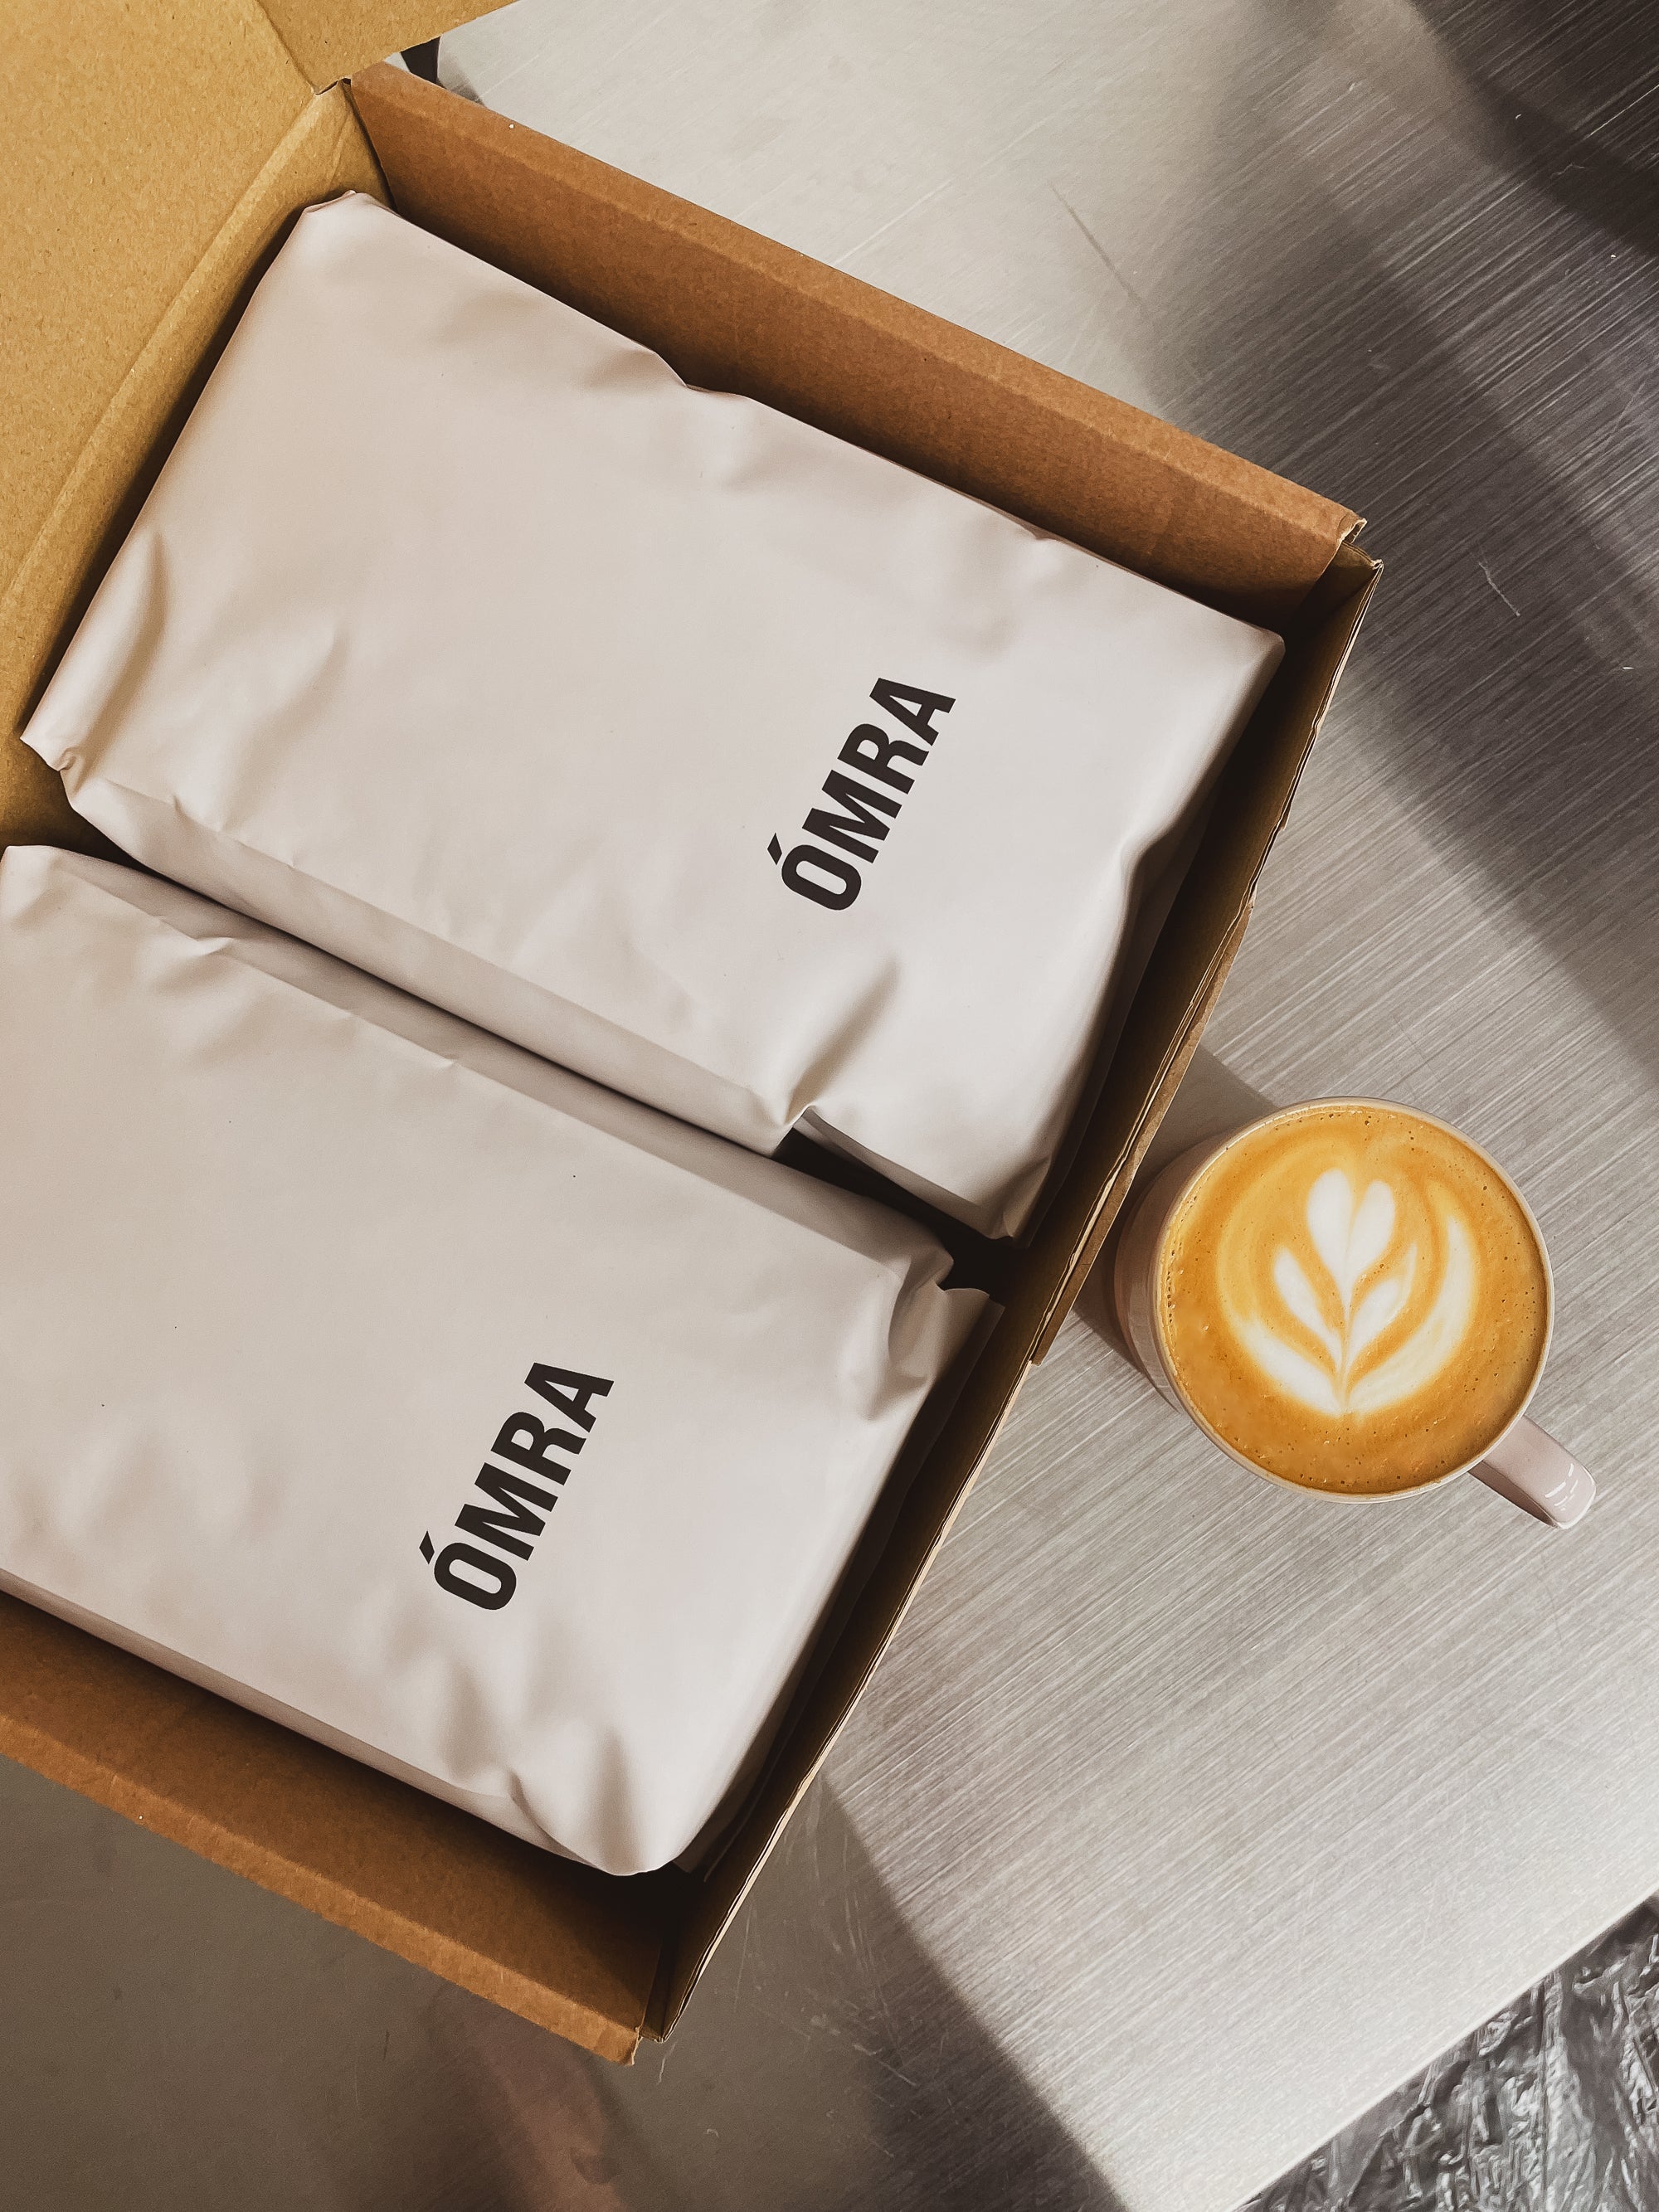 Two bags of freshly roasted Ómra specialty coffee on a table beside a freshly brewed flat white with latte art.